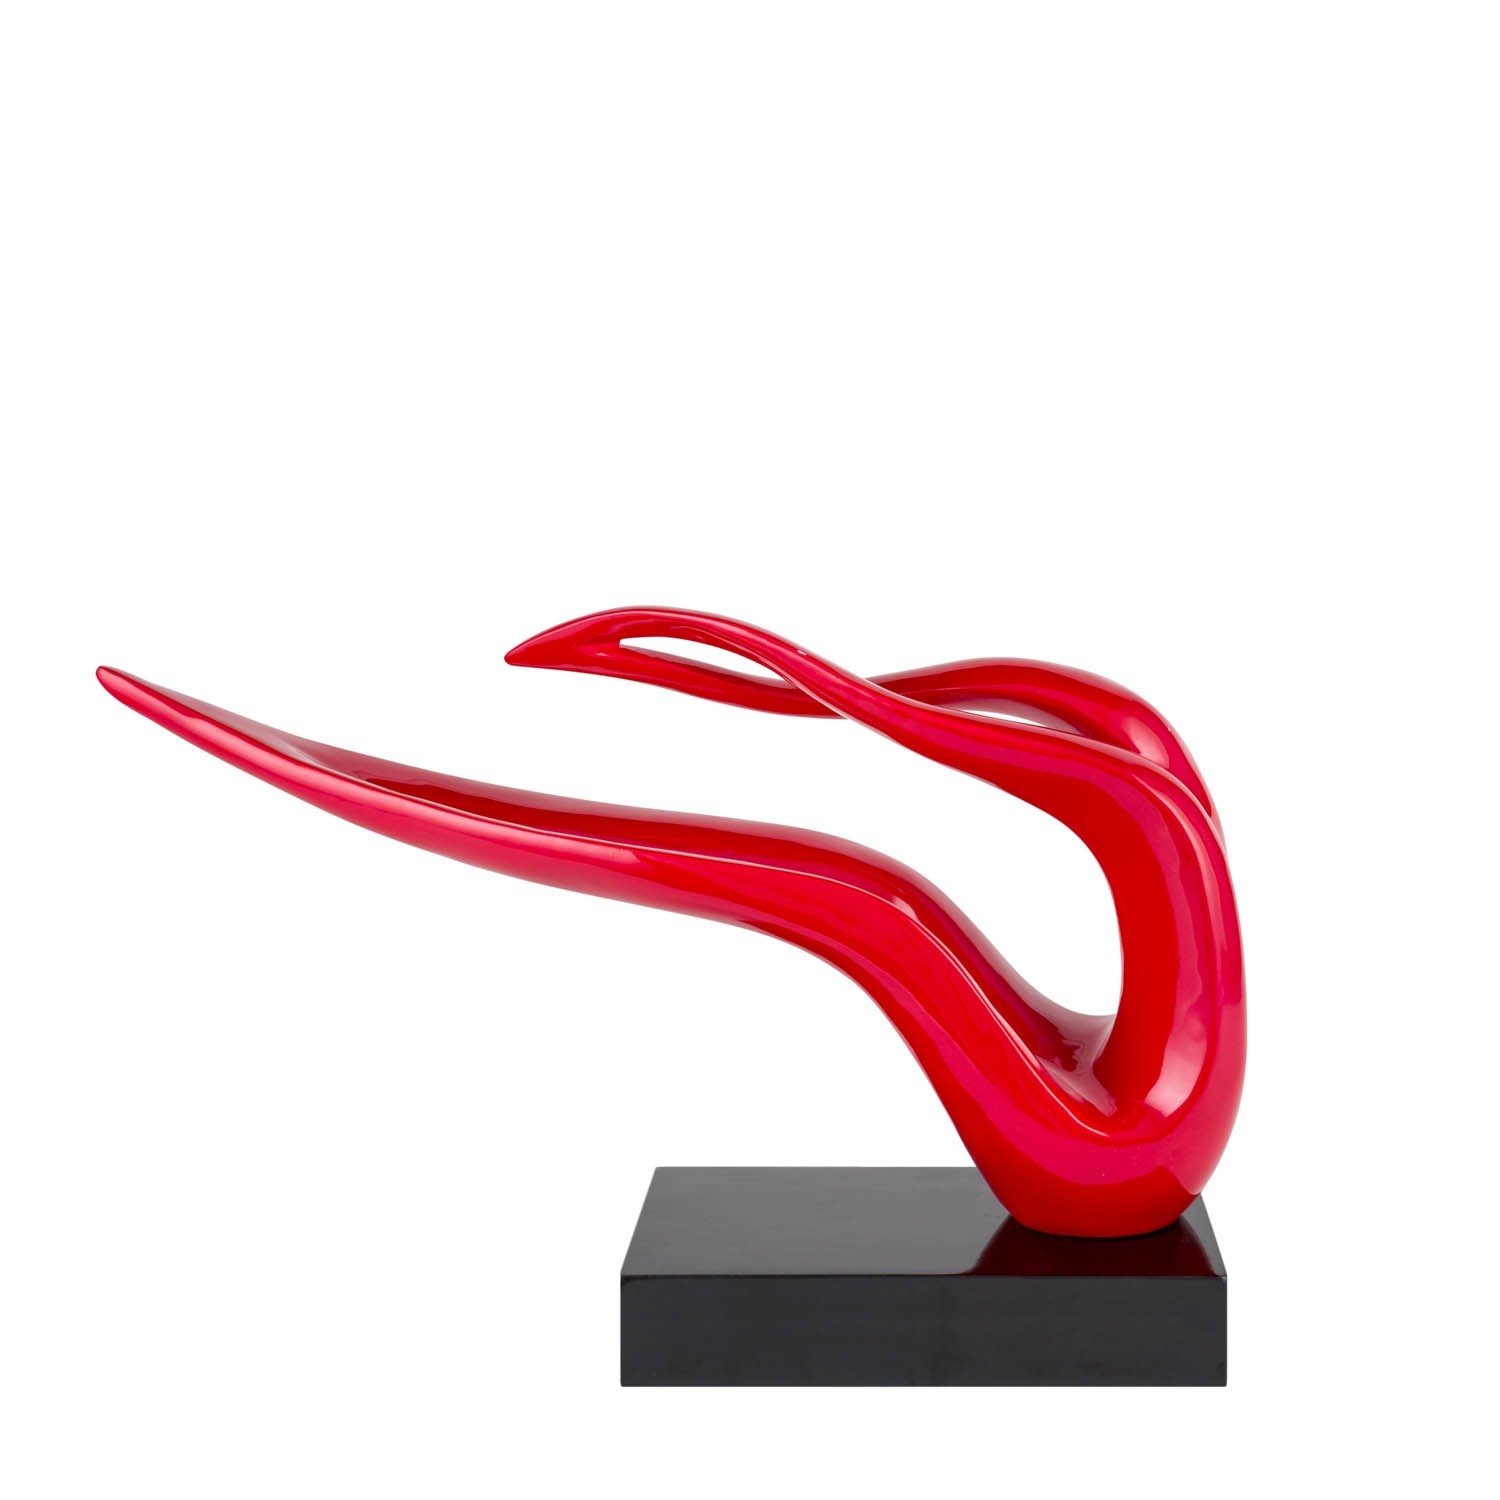 D1006 Abstract Figurine
Available in multiple colors